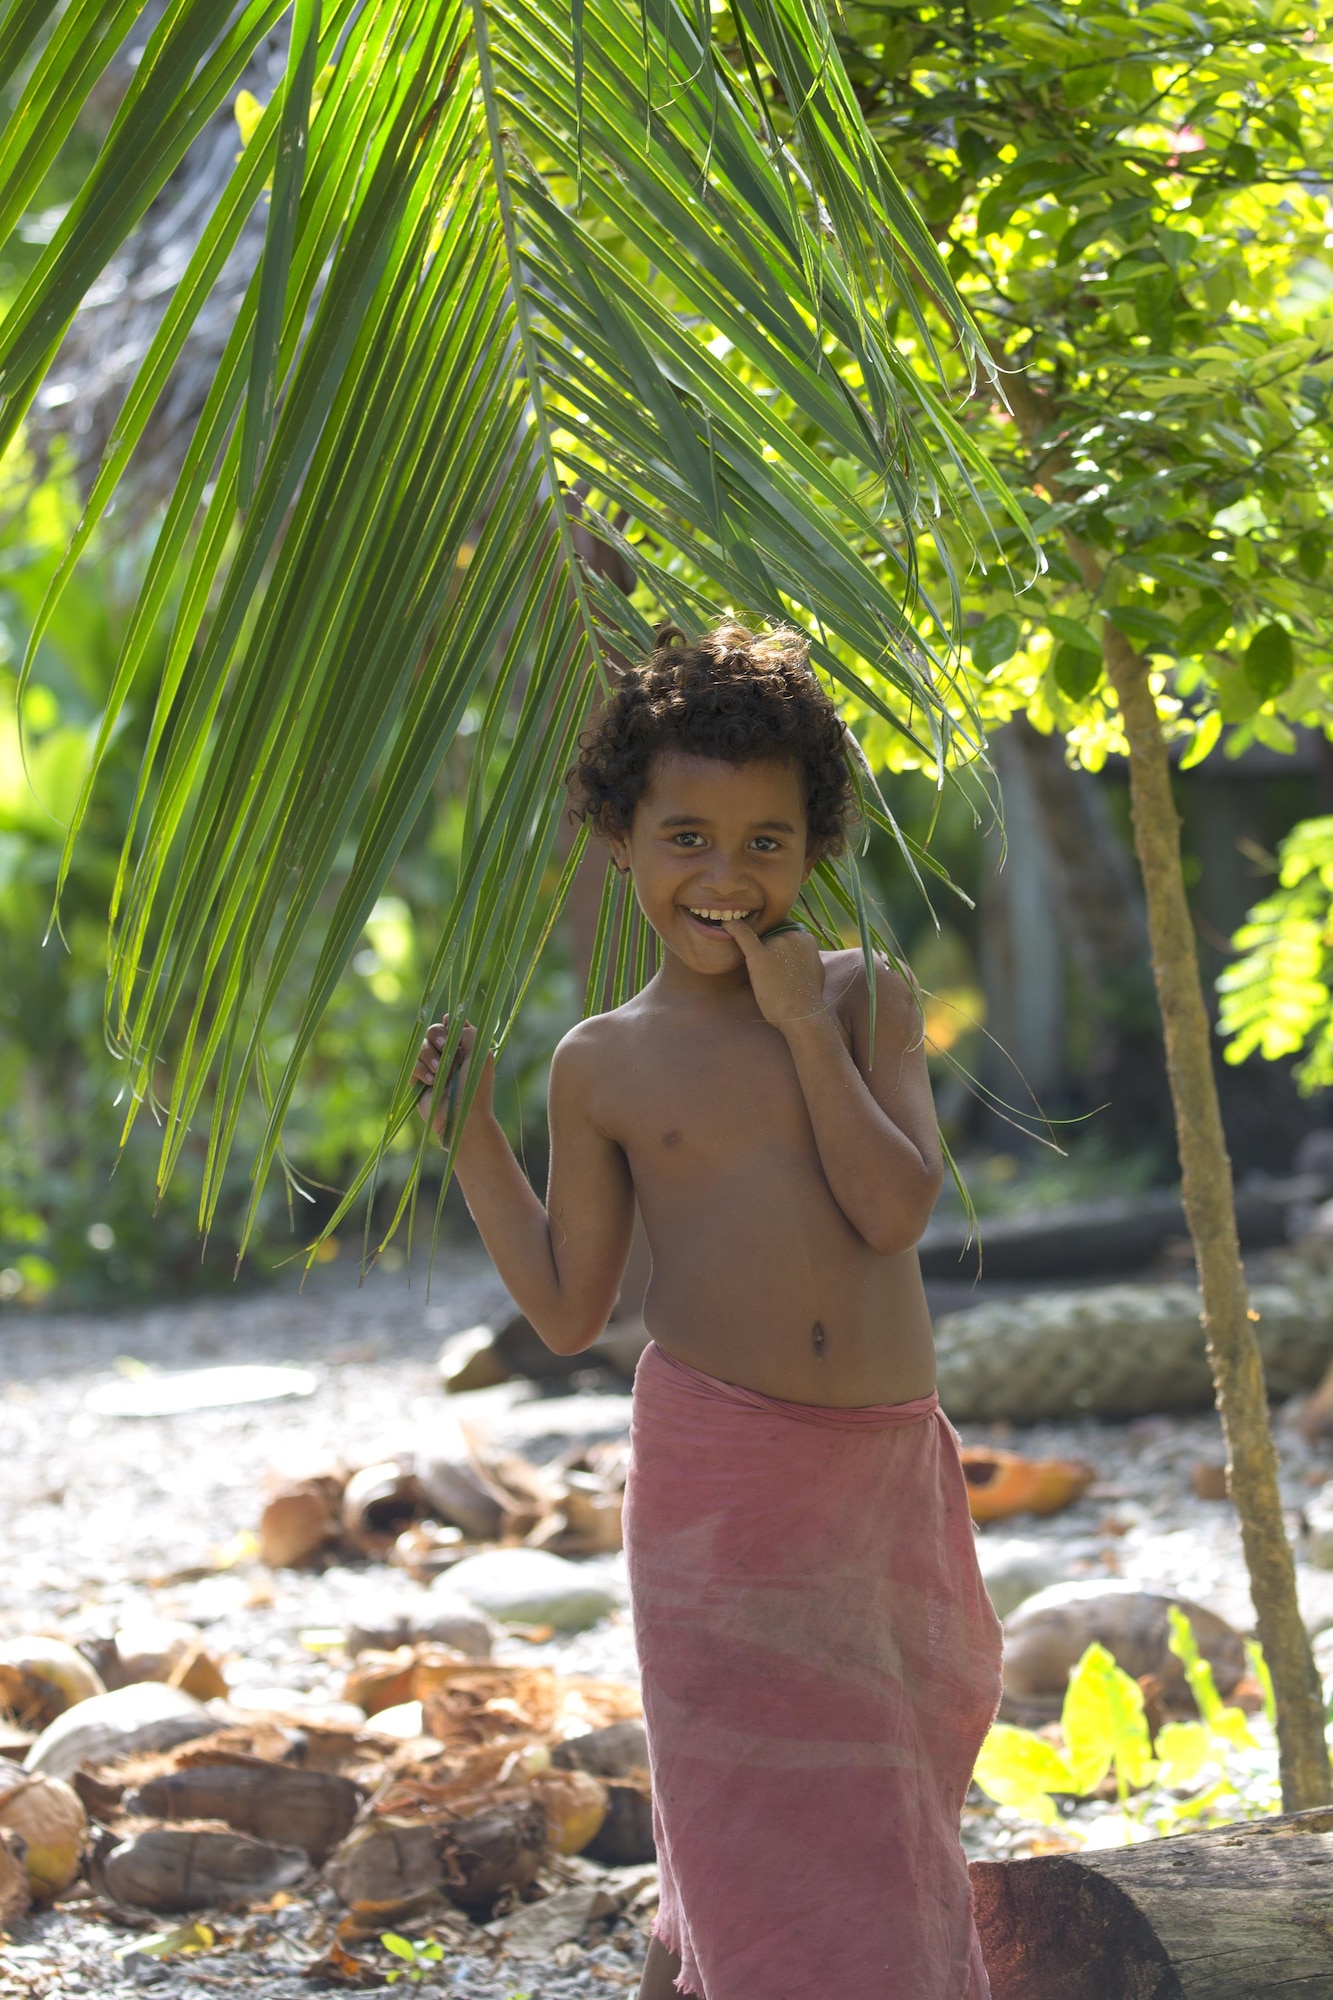 Nigh Hazong, 10, shows his smile under a coconut tree at Fais Island, Federated States of Micronesia, Dec. 8, 2015 during Operation Christmas Drop 2015. Fais Island is a raised coral island in the eastern Caroline Islands in the Pacific Ocean, and forms a legislative district in Yap State in the FSM. Fais Island is located approximately 54 miles east of Ulithi Atoll and 156 miles northeast of Yap. This year marks the first trilateral execution that includes air support from the Japan Air-Self Defense force and the Royal Australian Air Force. (U.S. Air Force photo by Osakabe Yasuo/Released)